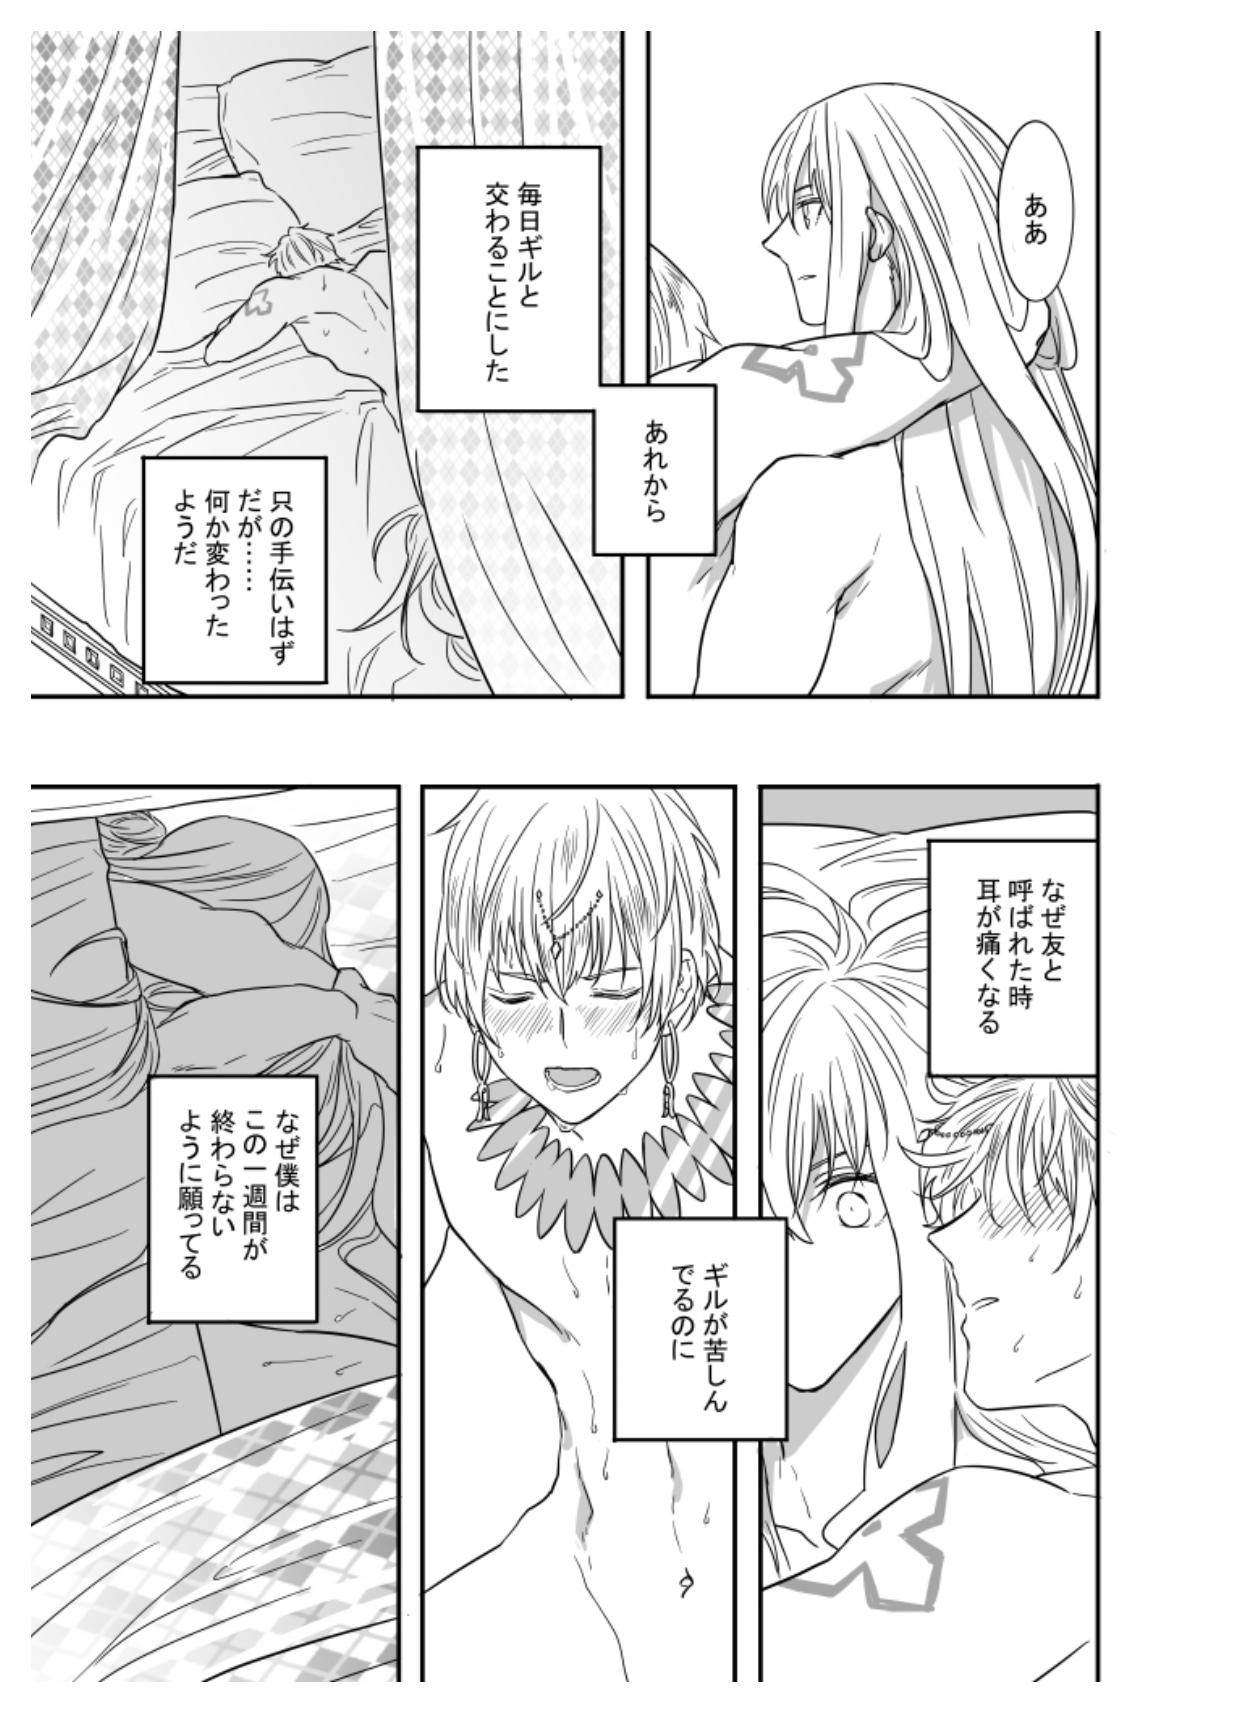 Piercings If I have soul - Fate grand order Real Couple - Page 9